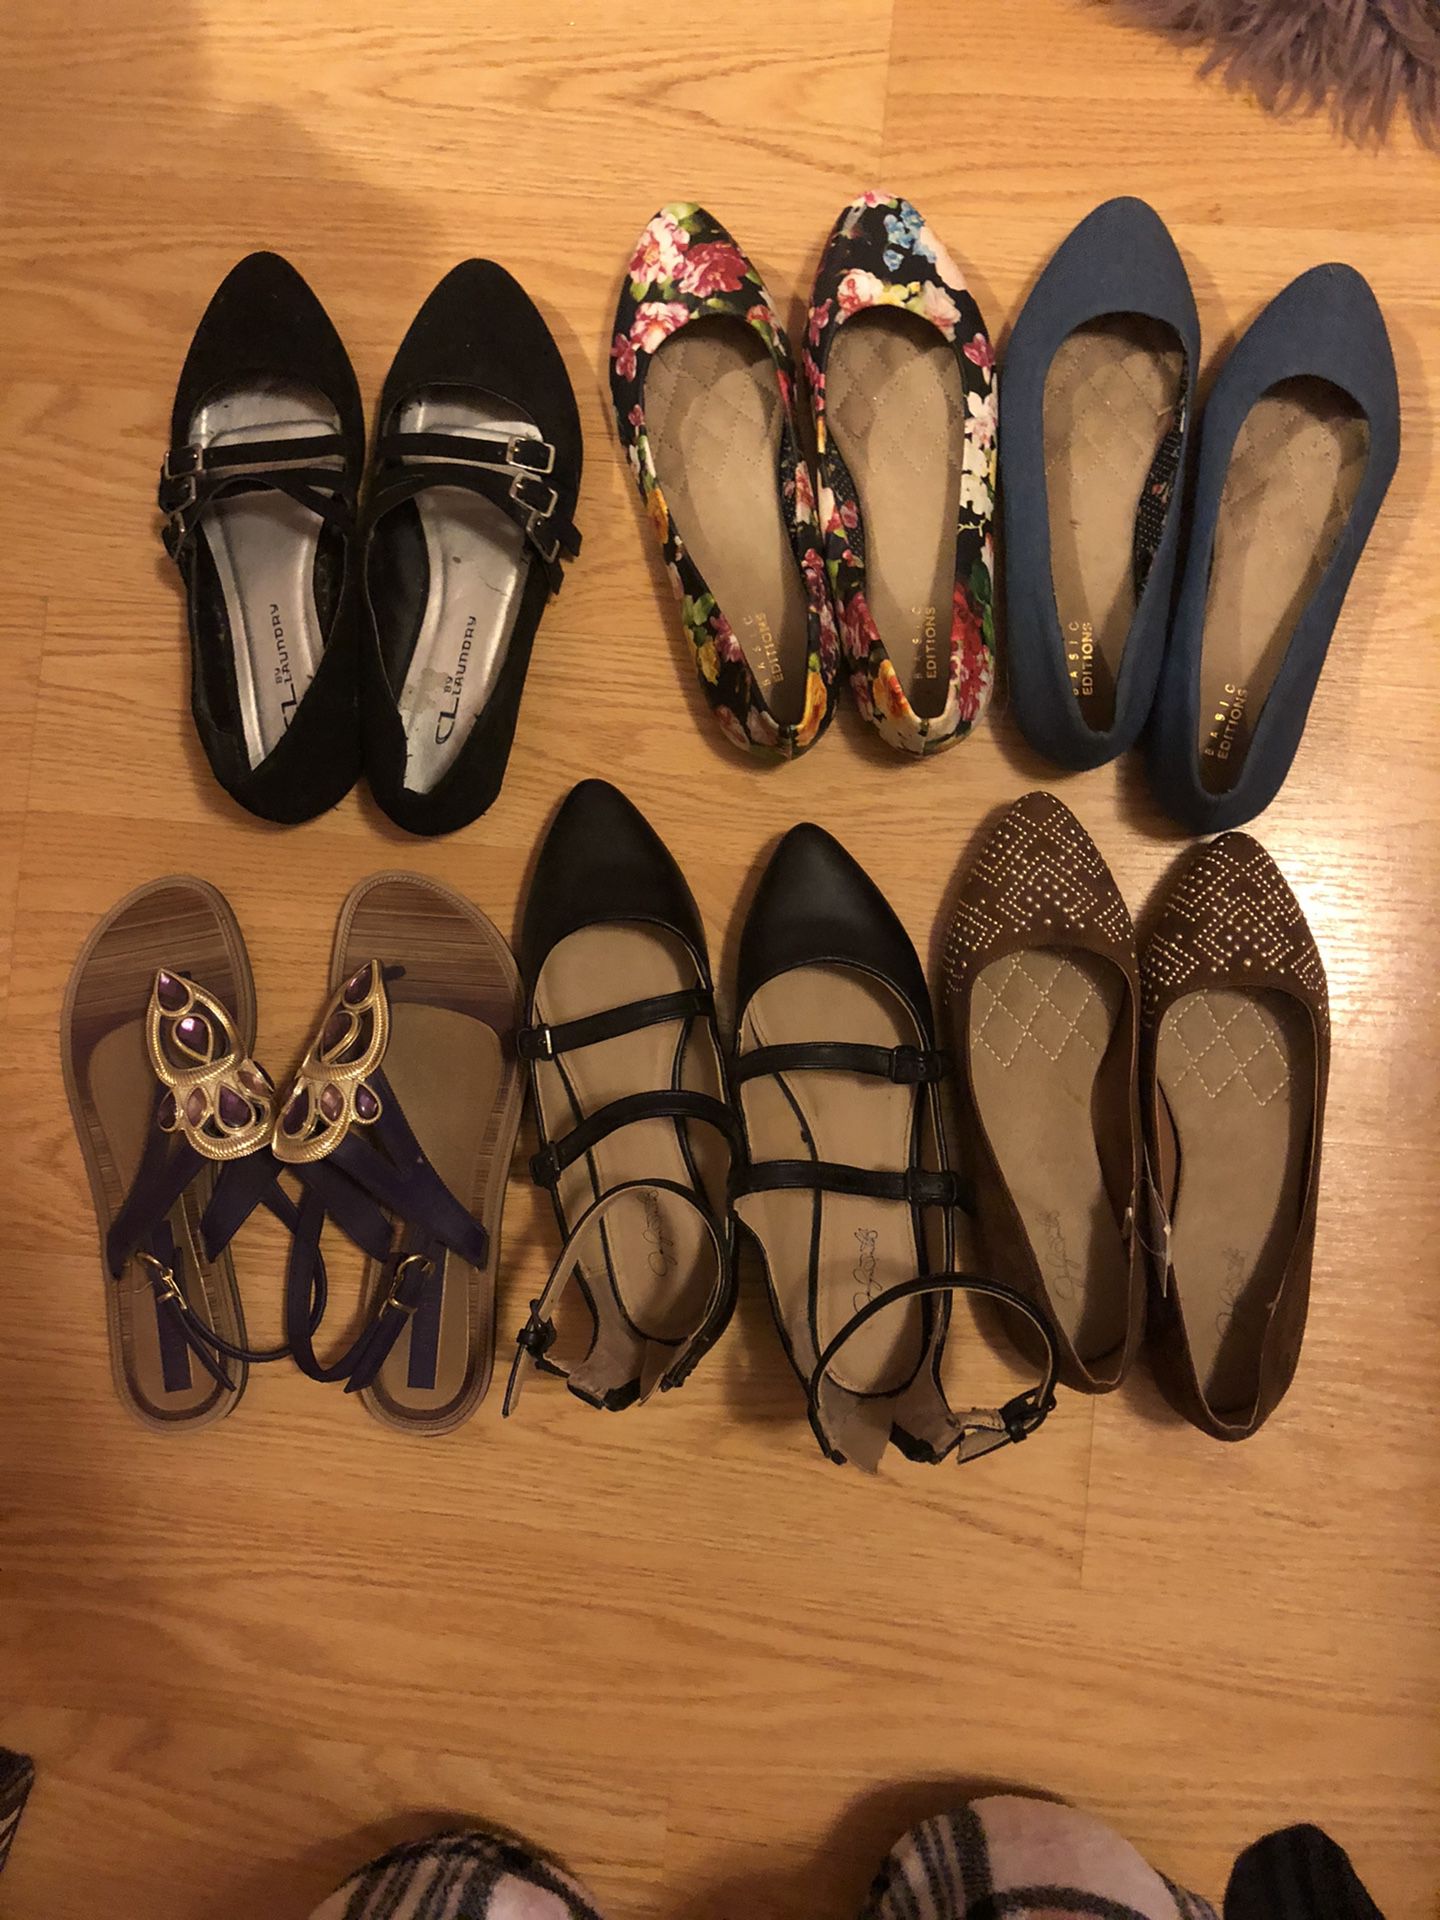 Flats, Sandals, and a pair of boots!